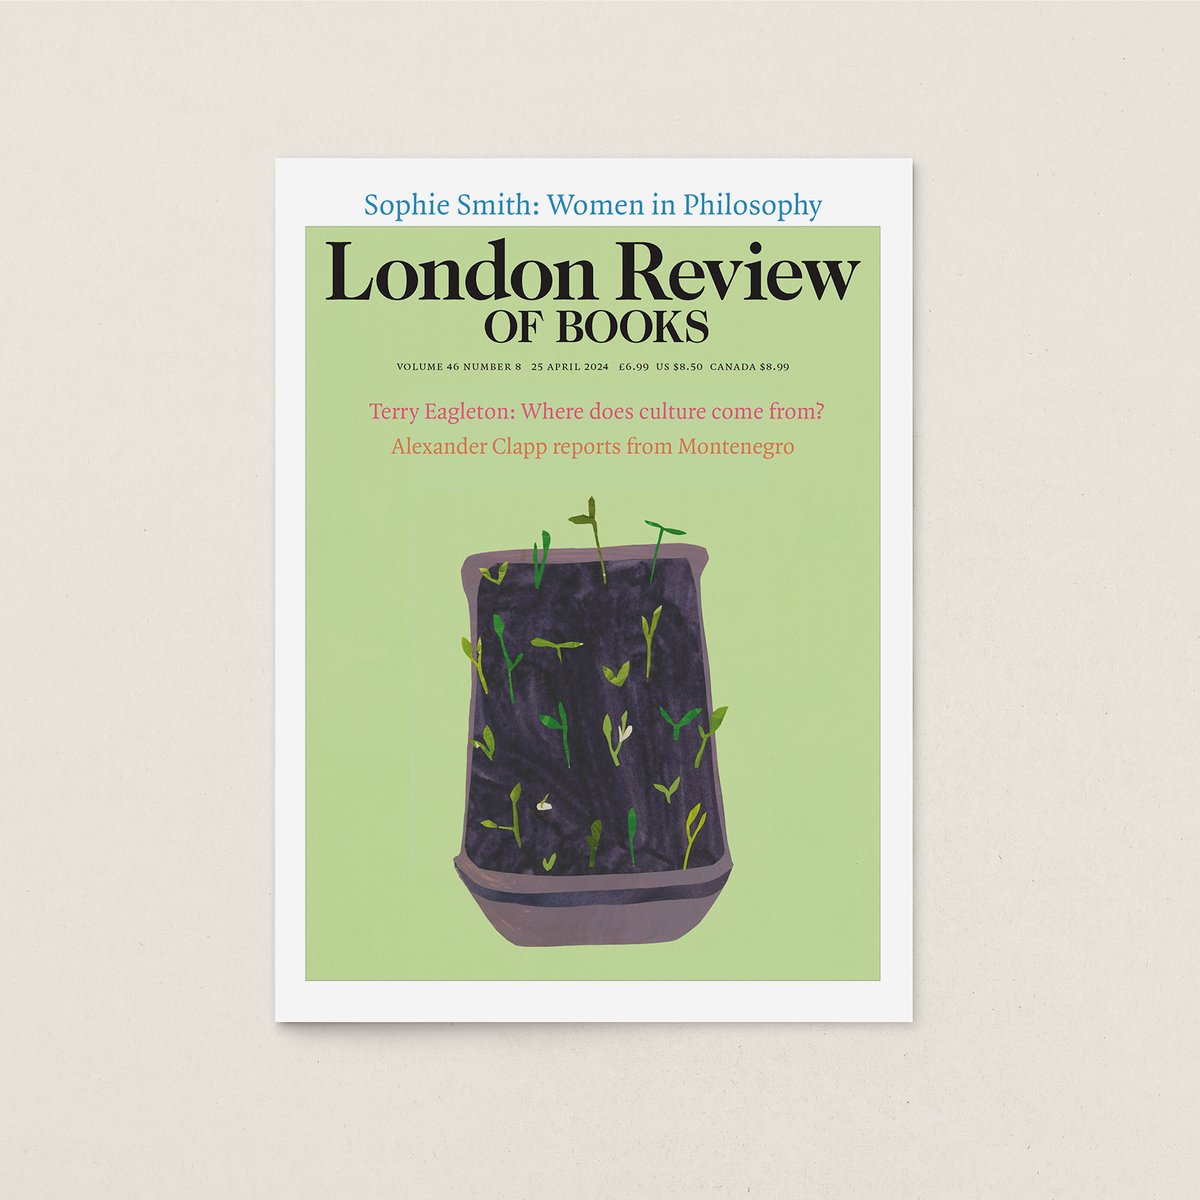 Our new issue, 46.08, is now online, featuring: @DrSophieSmith on women in philosophy Terry Eagleton on the origins of culture @alexander_clapp on organised crime in Montenegro @weizman_eyal on three genocides and a cover by @HelenNapper. Read now at lrb.co.uk